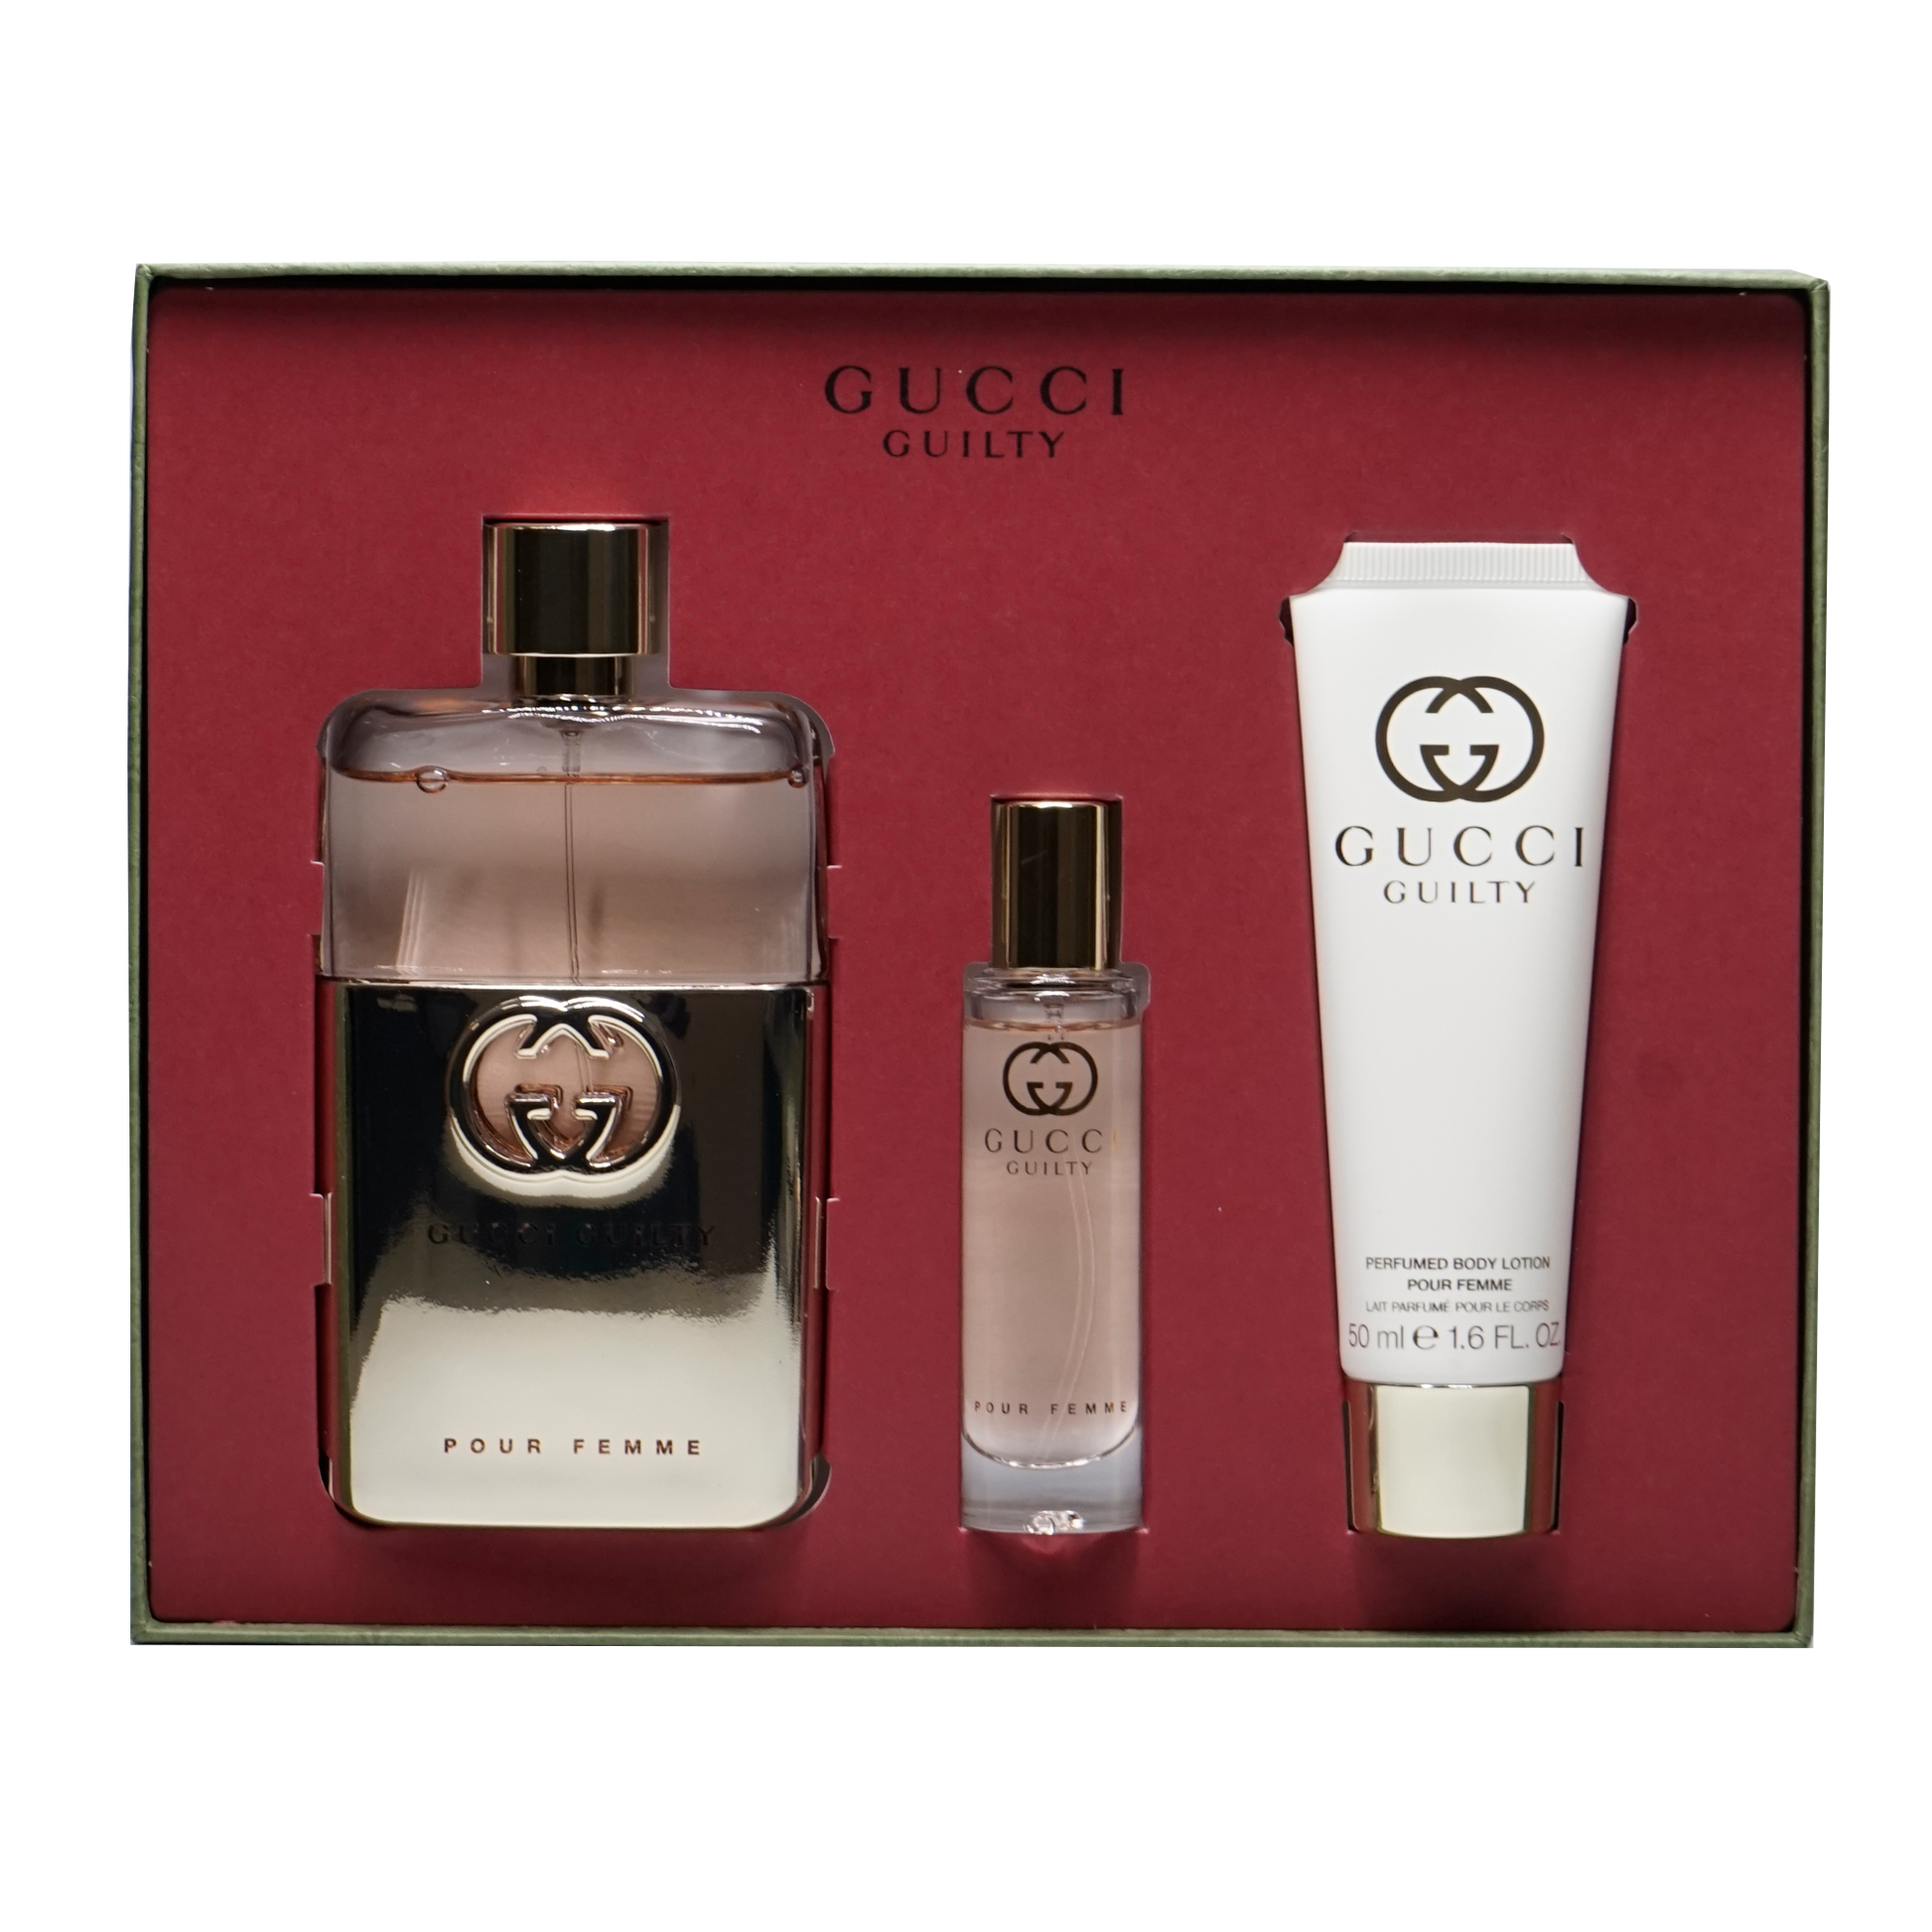 Guilty - Gucci - Gift Set